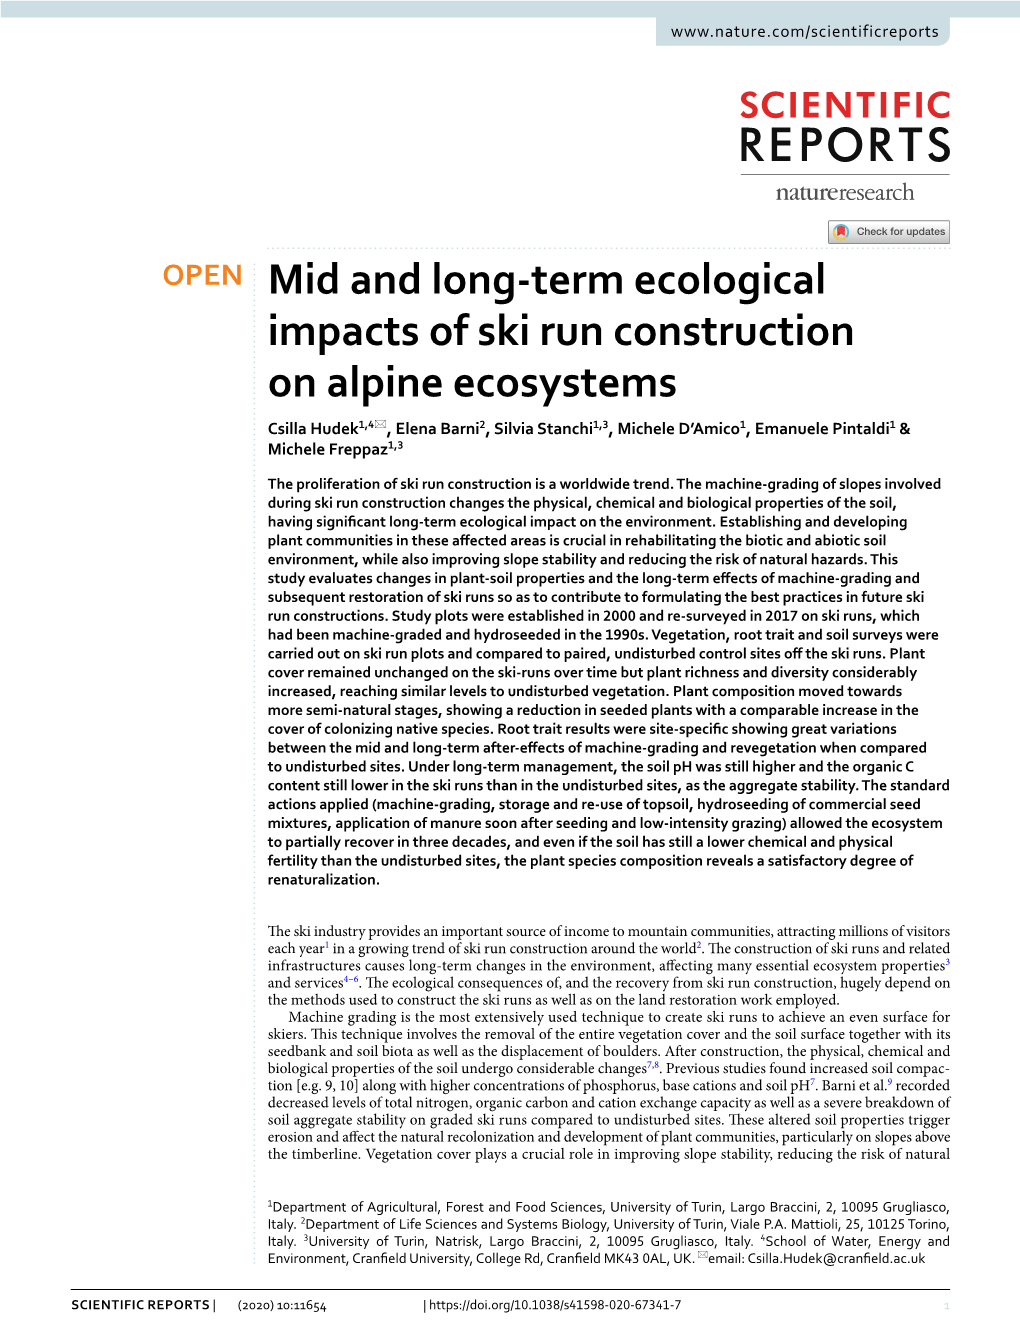 Mid and Long-Term Ecological Impacts of Ski Run Construction on Alpine